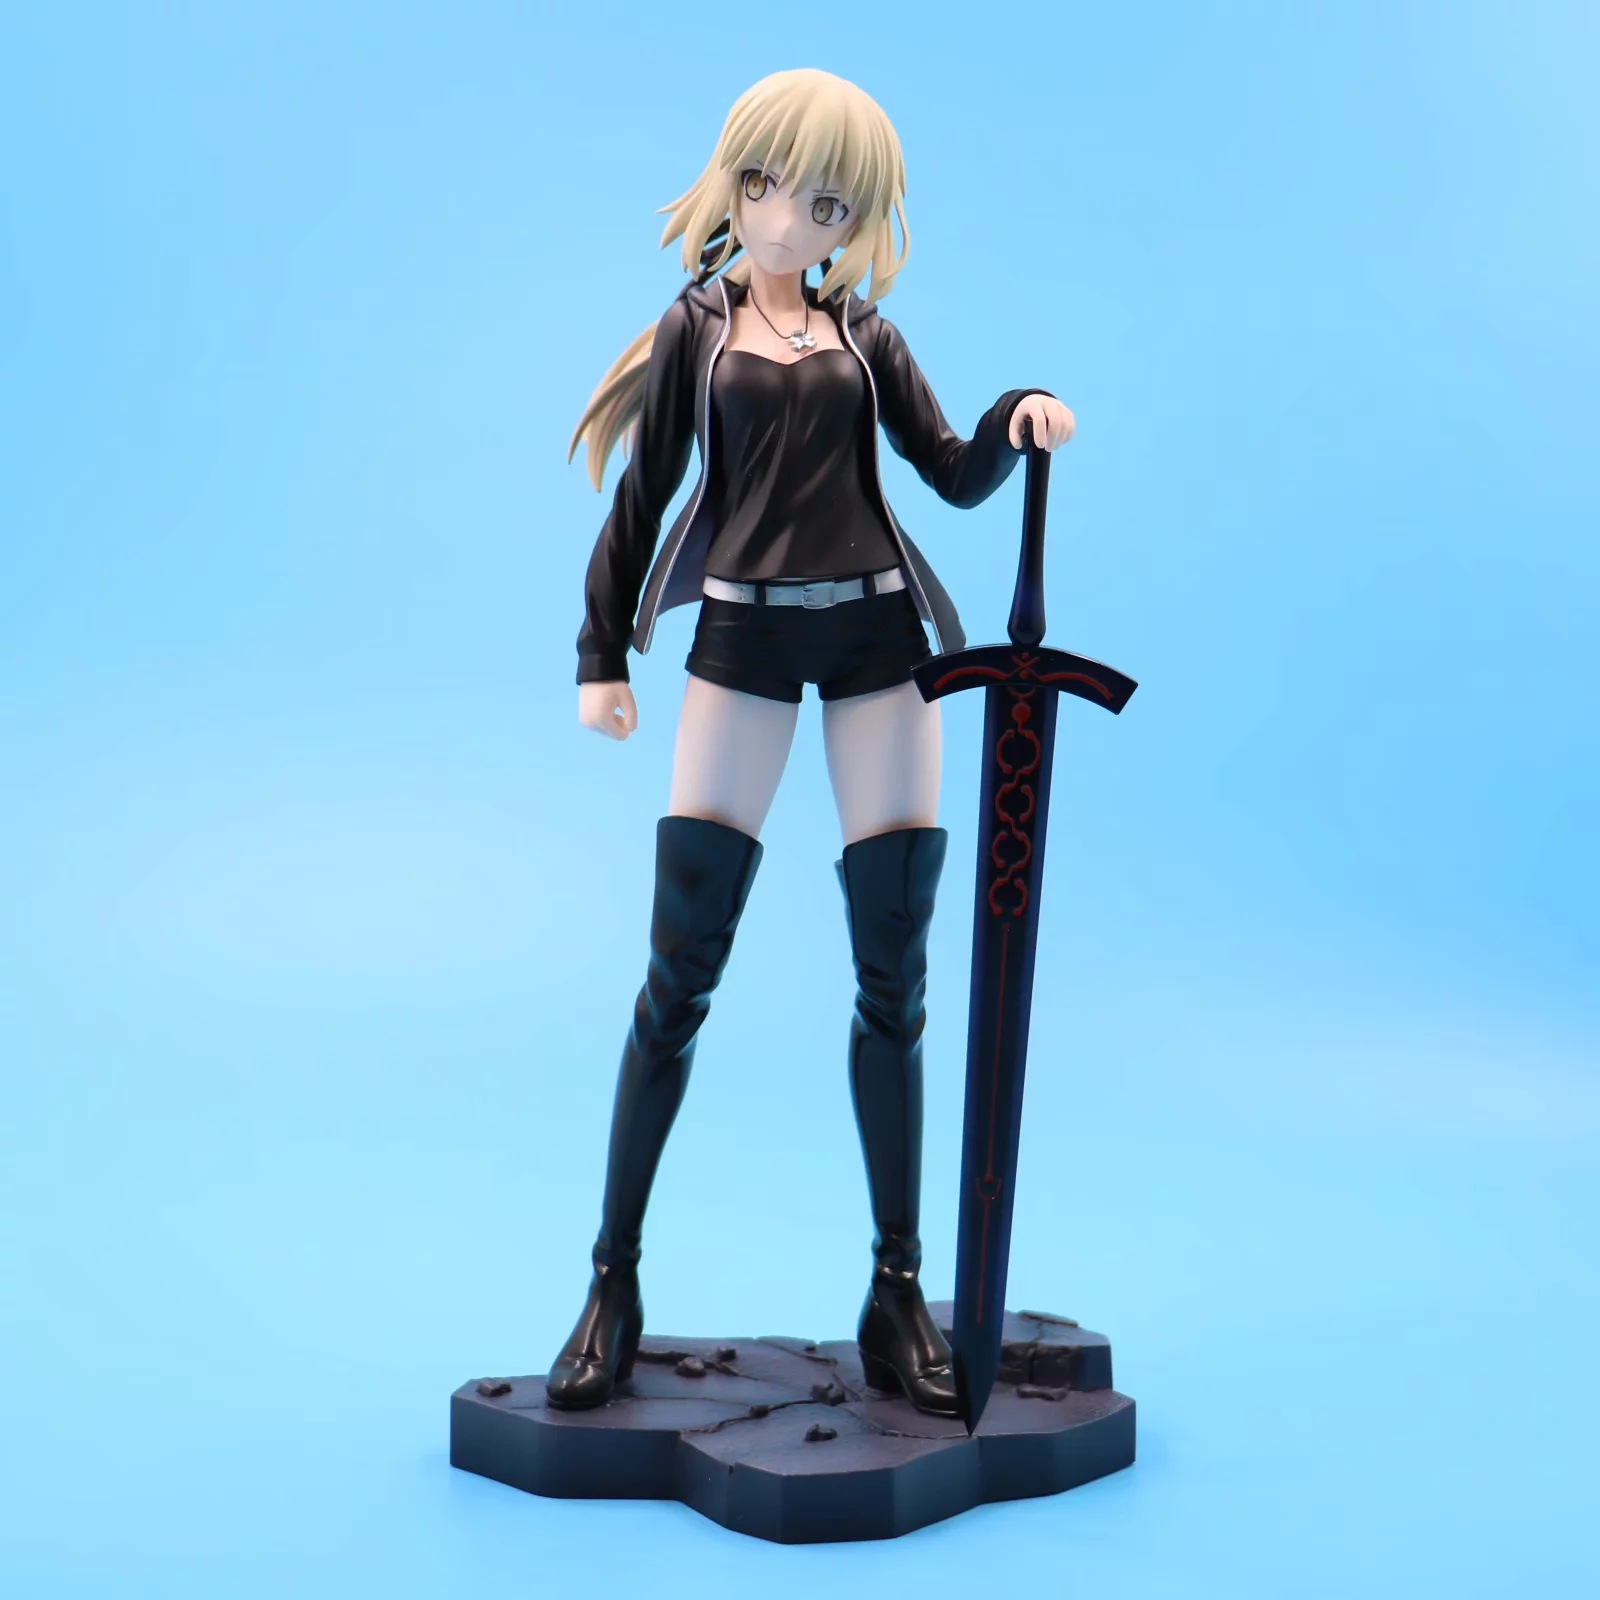 Anime Fate/Stay Night Saber Master Altria 1/7 PVC Figure Toy Gift